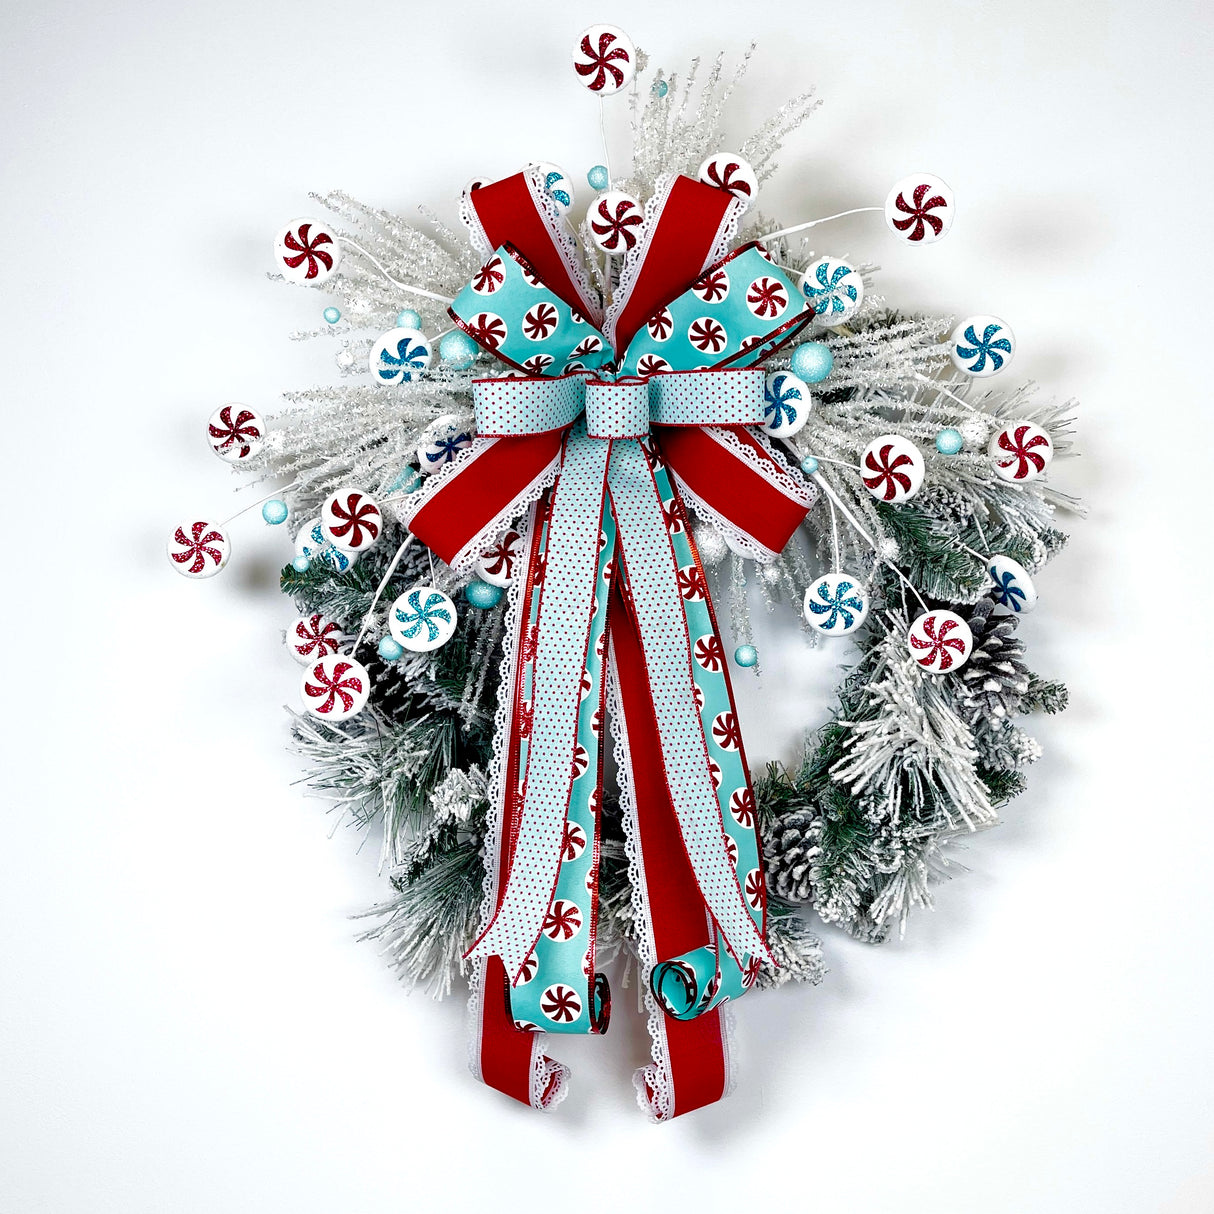 Whimsical Candy Wreath TUTORIAL ONLY